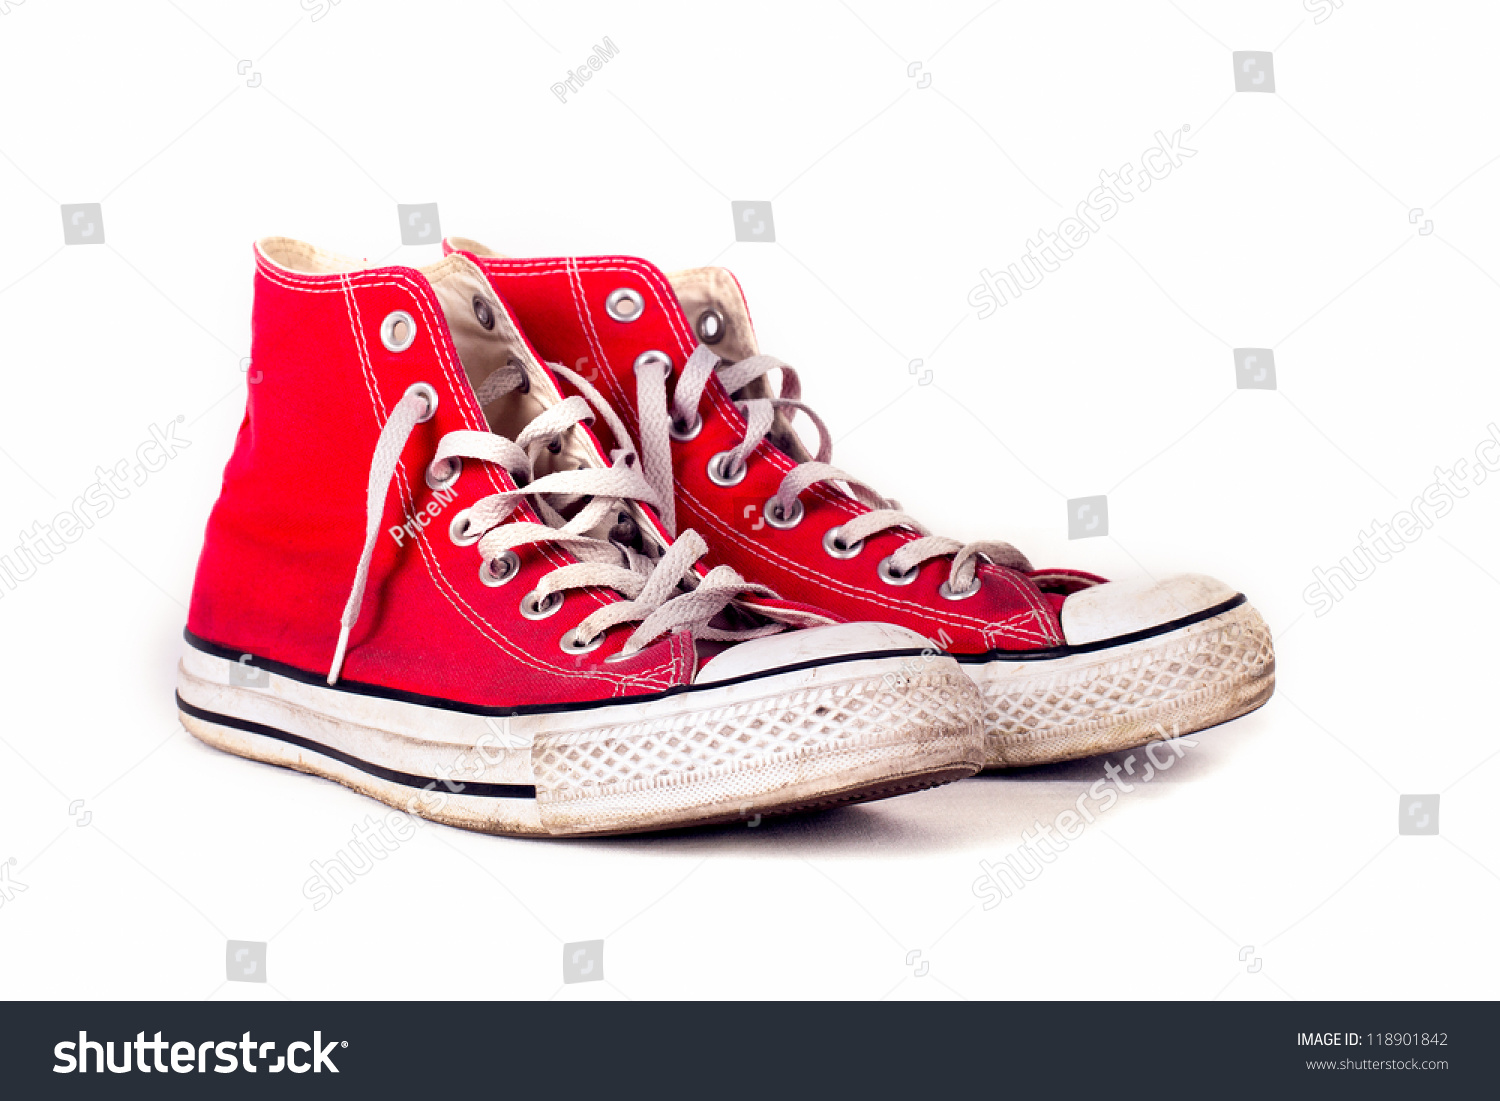 Vintage Sports Red Shoes Stock Photo 118901842 : Shutterstock